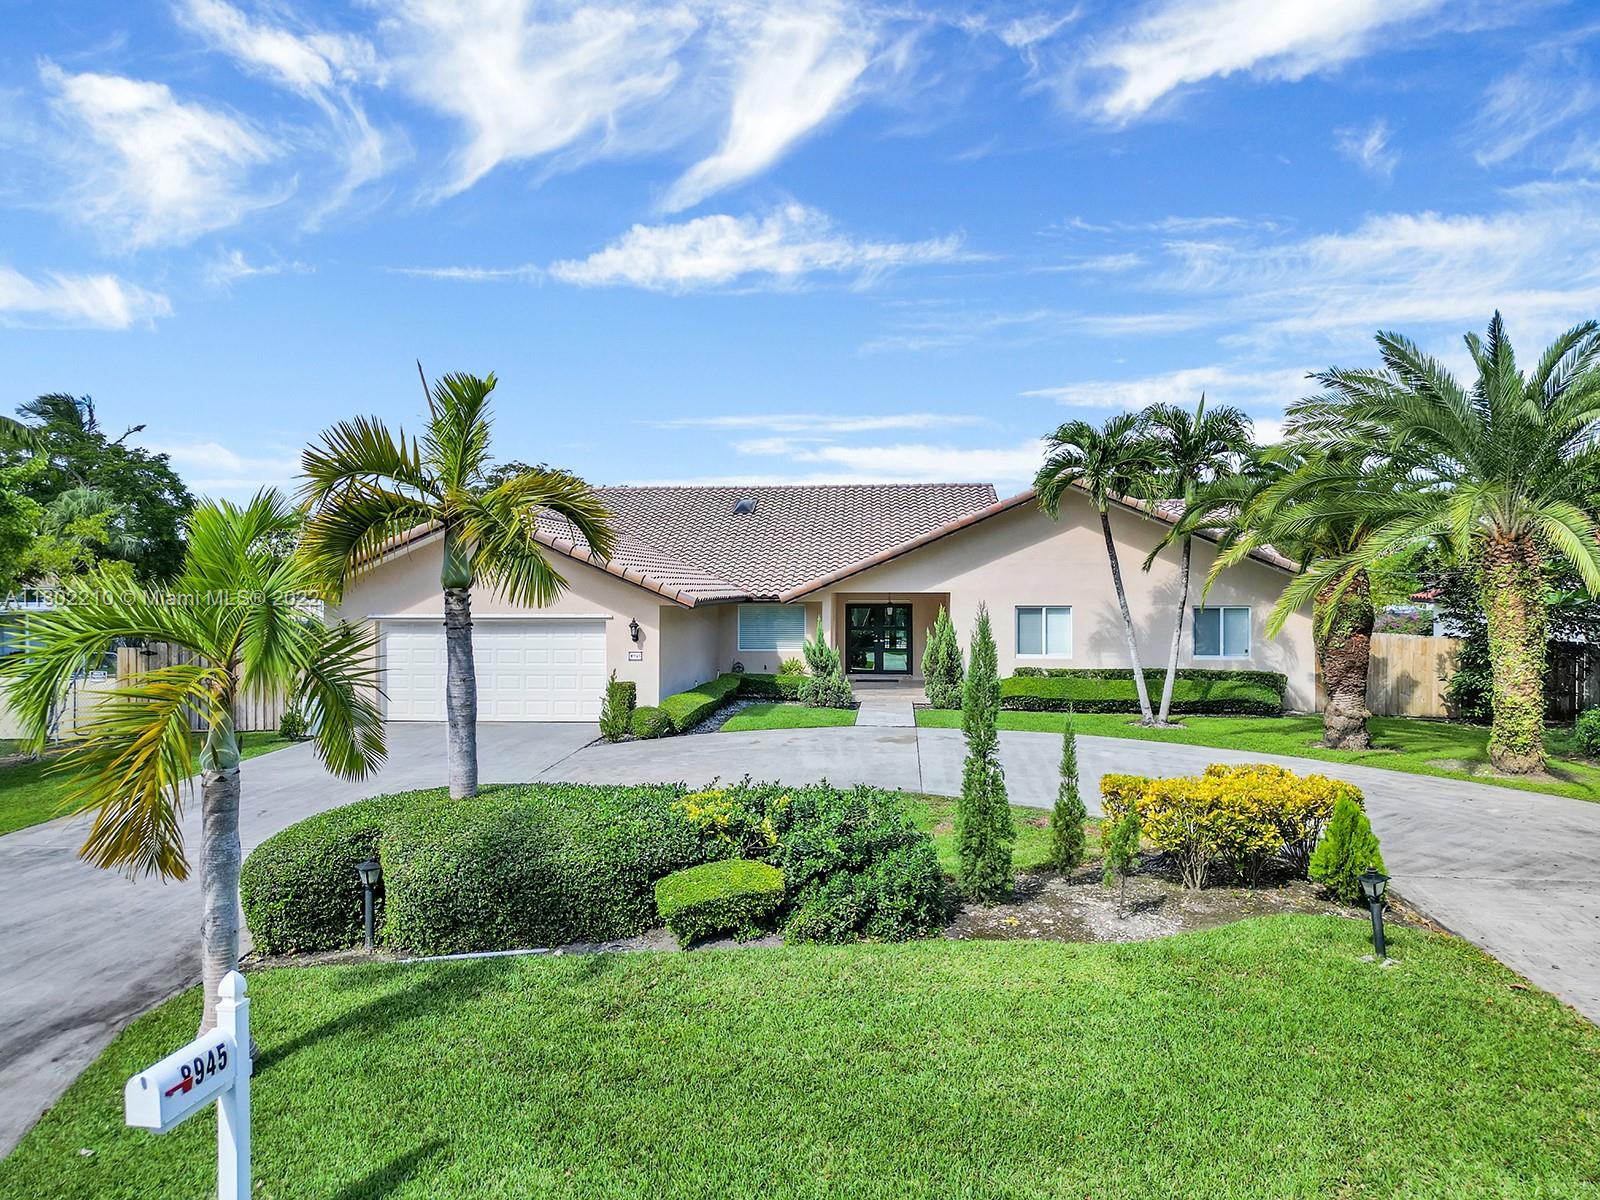 Welcome home to beautiful Palmetto Bay! Considered a top place to live in Florida, this family-friendly community is in an A-rated school district with lush tree-lined streets & a sparse suburban feel.
Make this bright, open-concept home yours! Lots of space for entertaining & bringing the family together. This 4/2.5 on a 0.52-acre lot has natural light, high vaulted ceilings, sky lights in common areas, 2-car garage & a wide covered patio overlooking the pool & huge yard for the kids & dog(s) to enjoy! Beautifully renovated with impact-resistant front door, vinyl floors, closets, water heater, huge kitchen island with a quartz countertop to fit the whole family & new sprinklers. The master bedroom boasts walk-in closets with built-ins & the 3 other bedrooms are light and spacious, too!